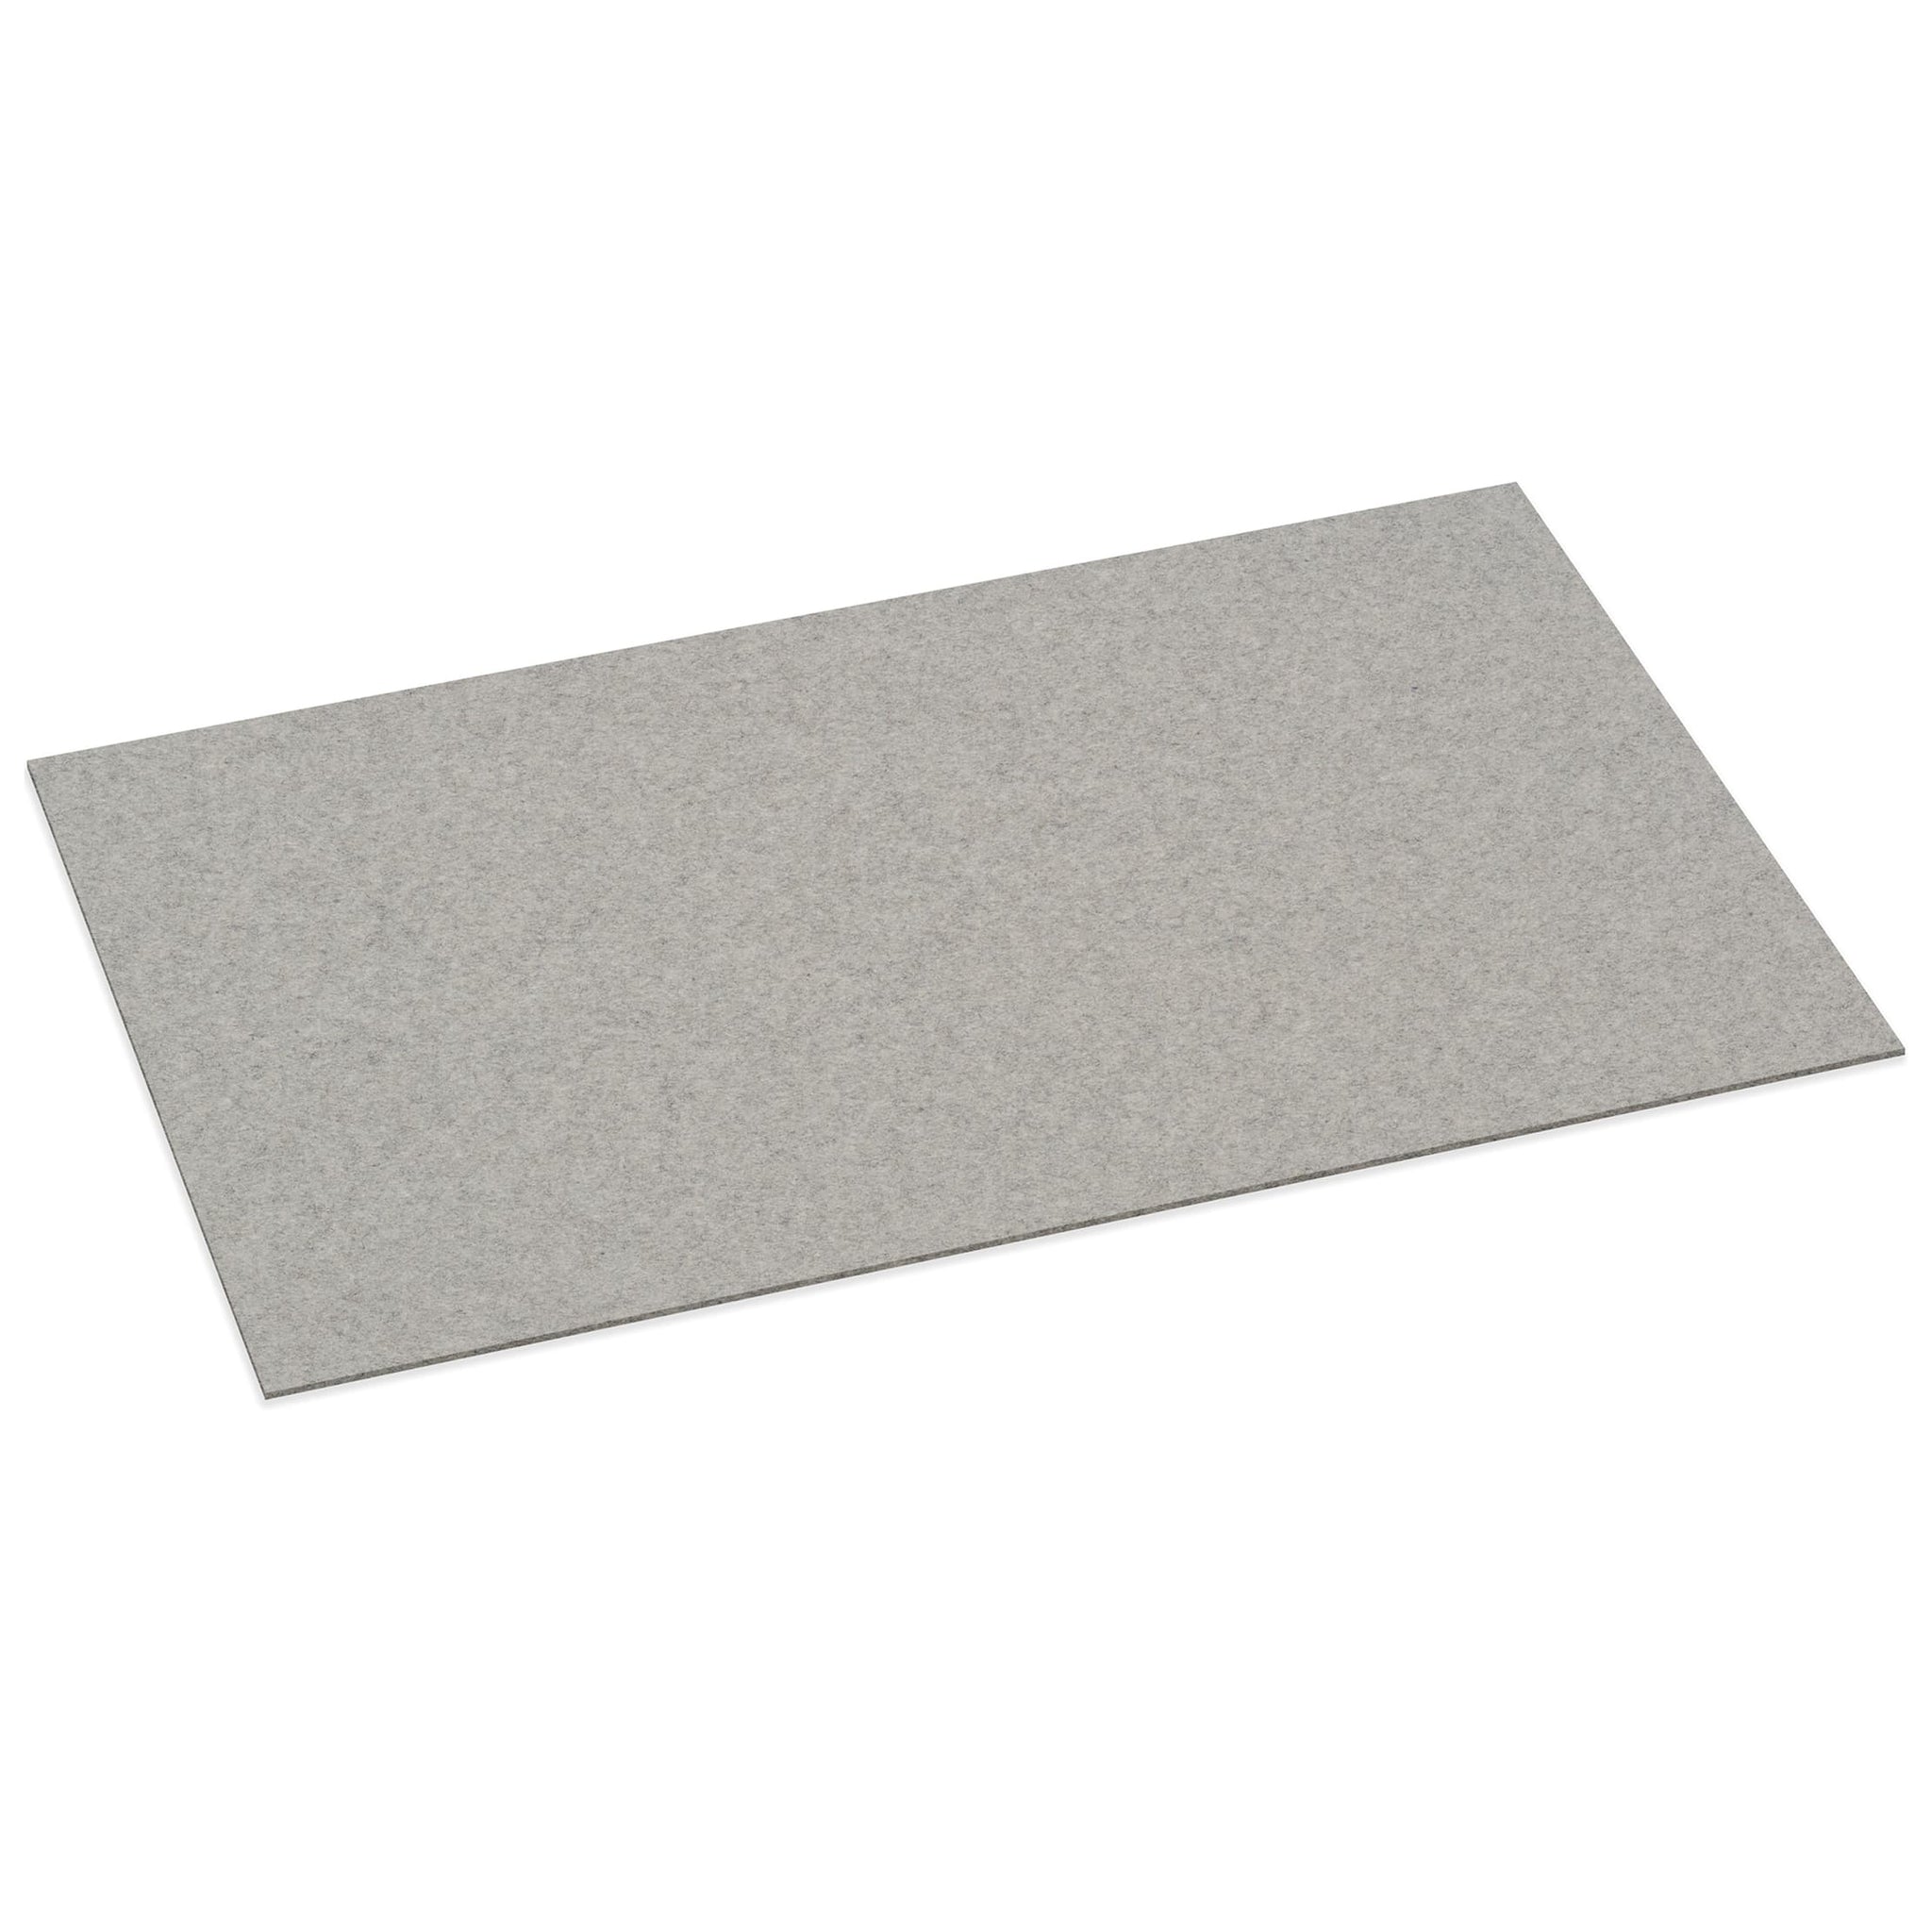 Rectangular Felt Desk Pad in Light Grey by Hey-Sign 300109007 looking at Front-Angle